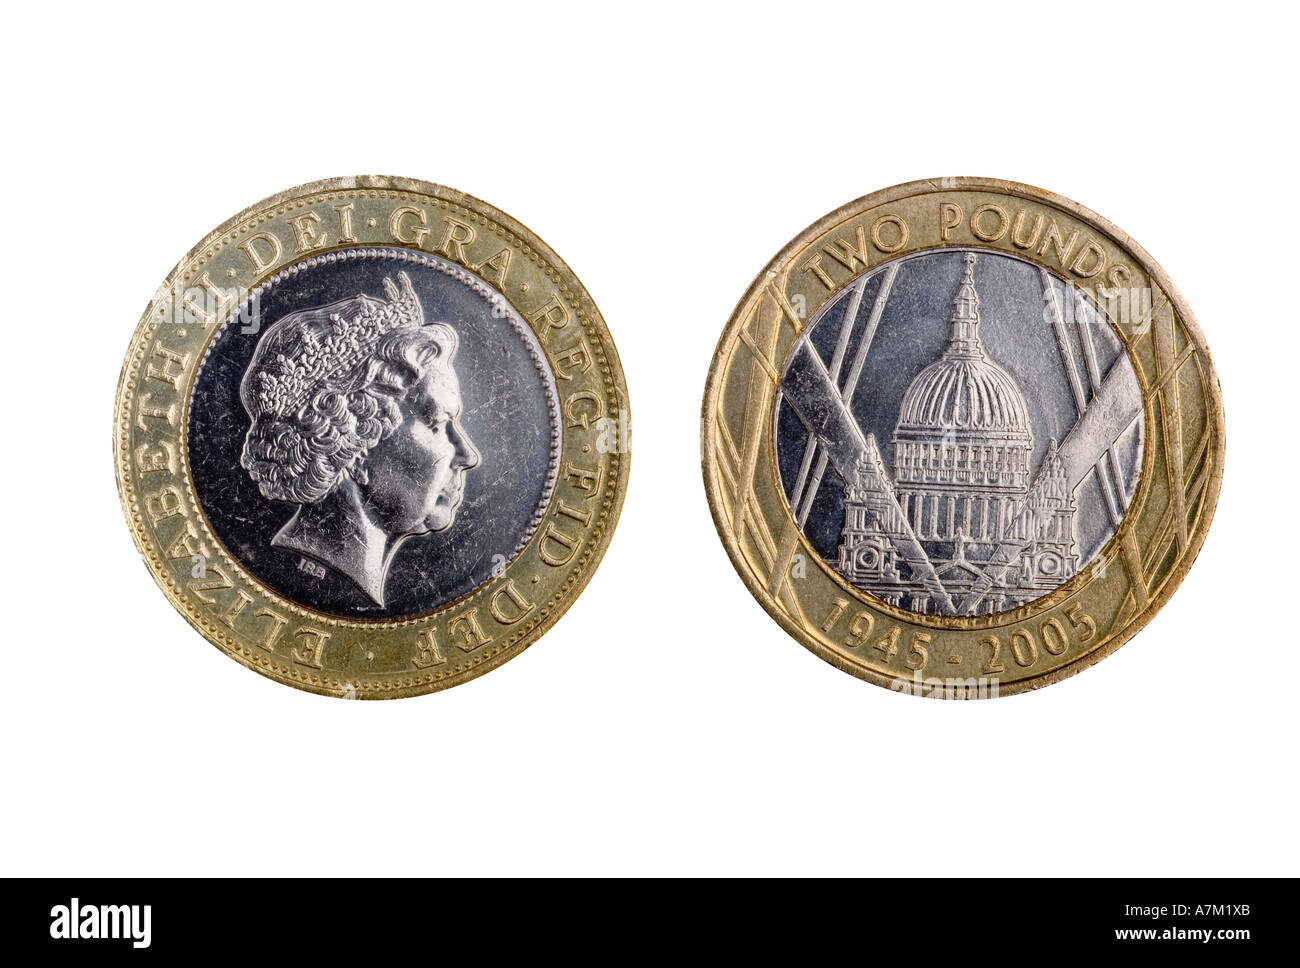 2005 GBP UK two pound coin with St Pauls cathedral Stock Photo